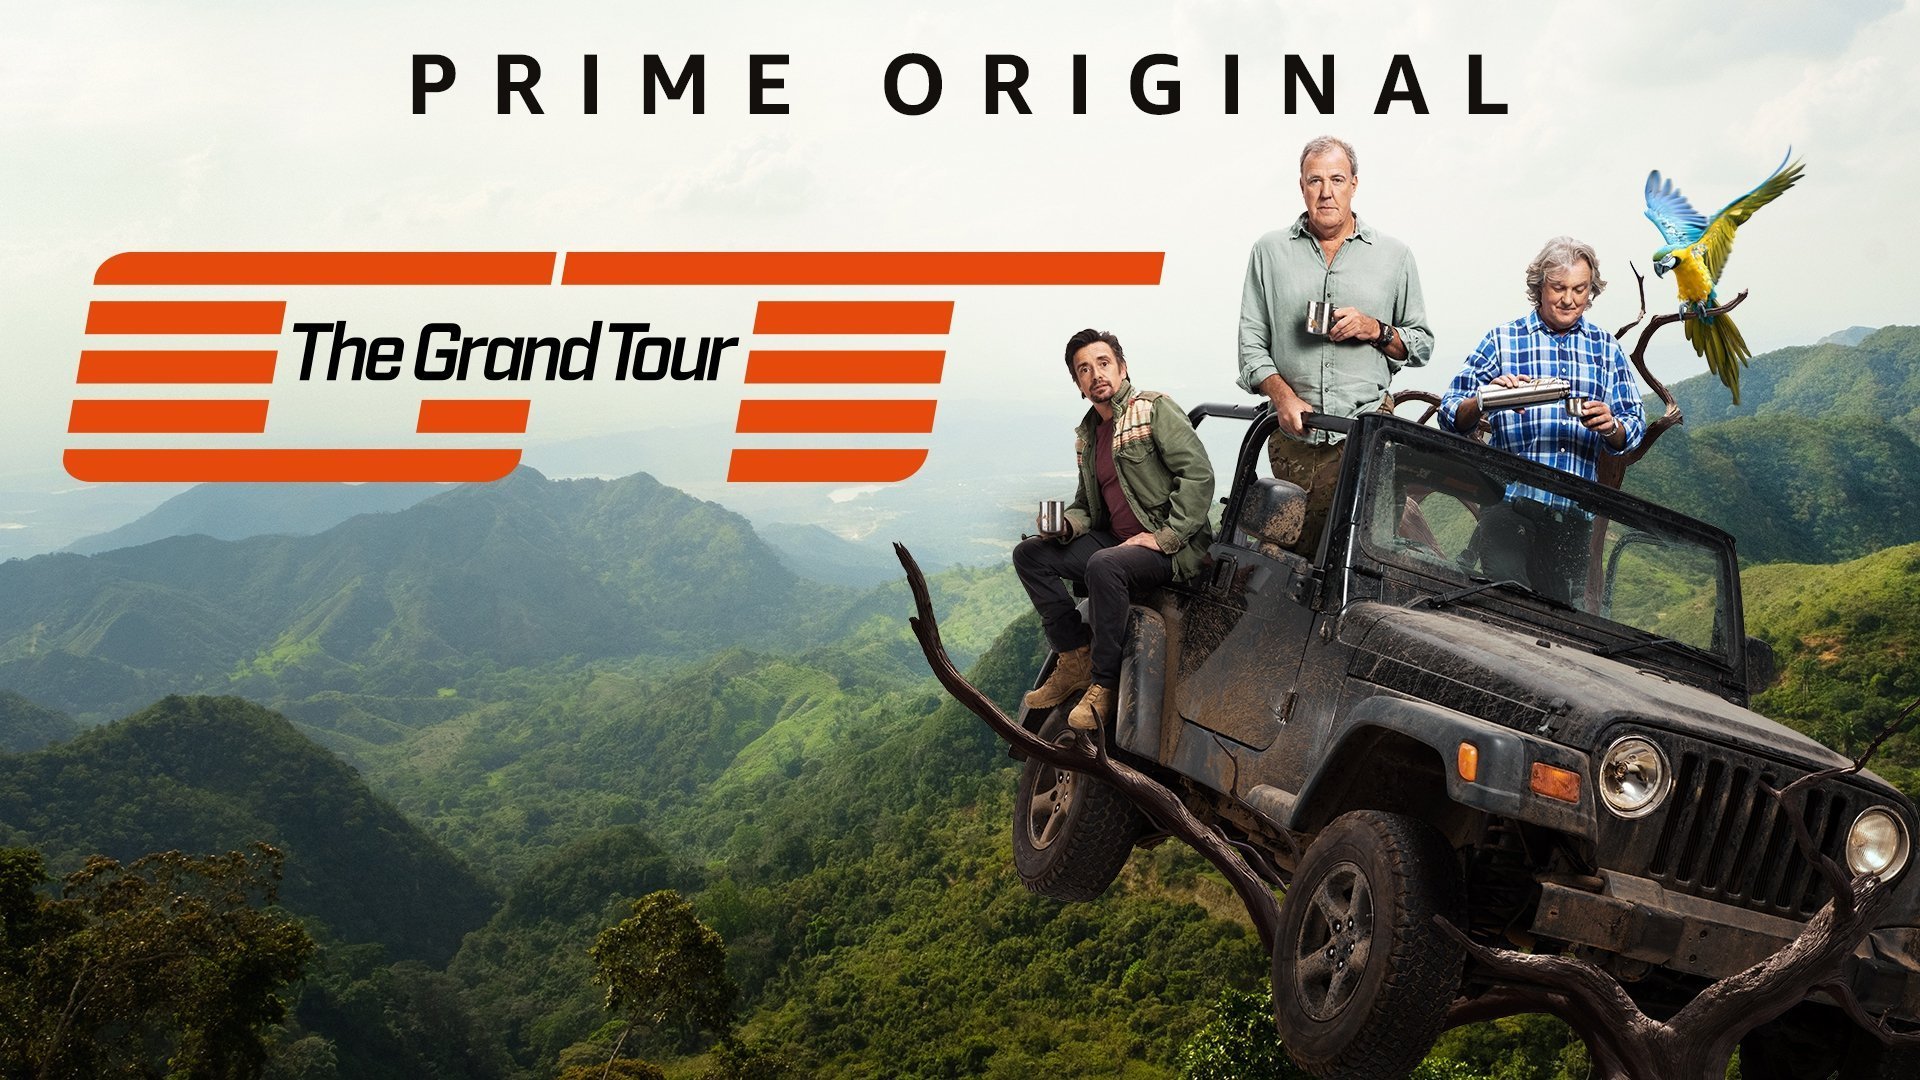 10 Things to Know About 'The Grand Tour' Season 3 - GeekDad